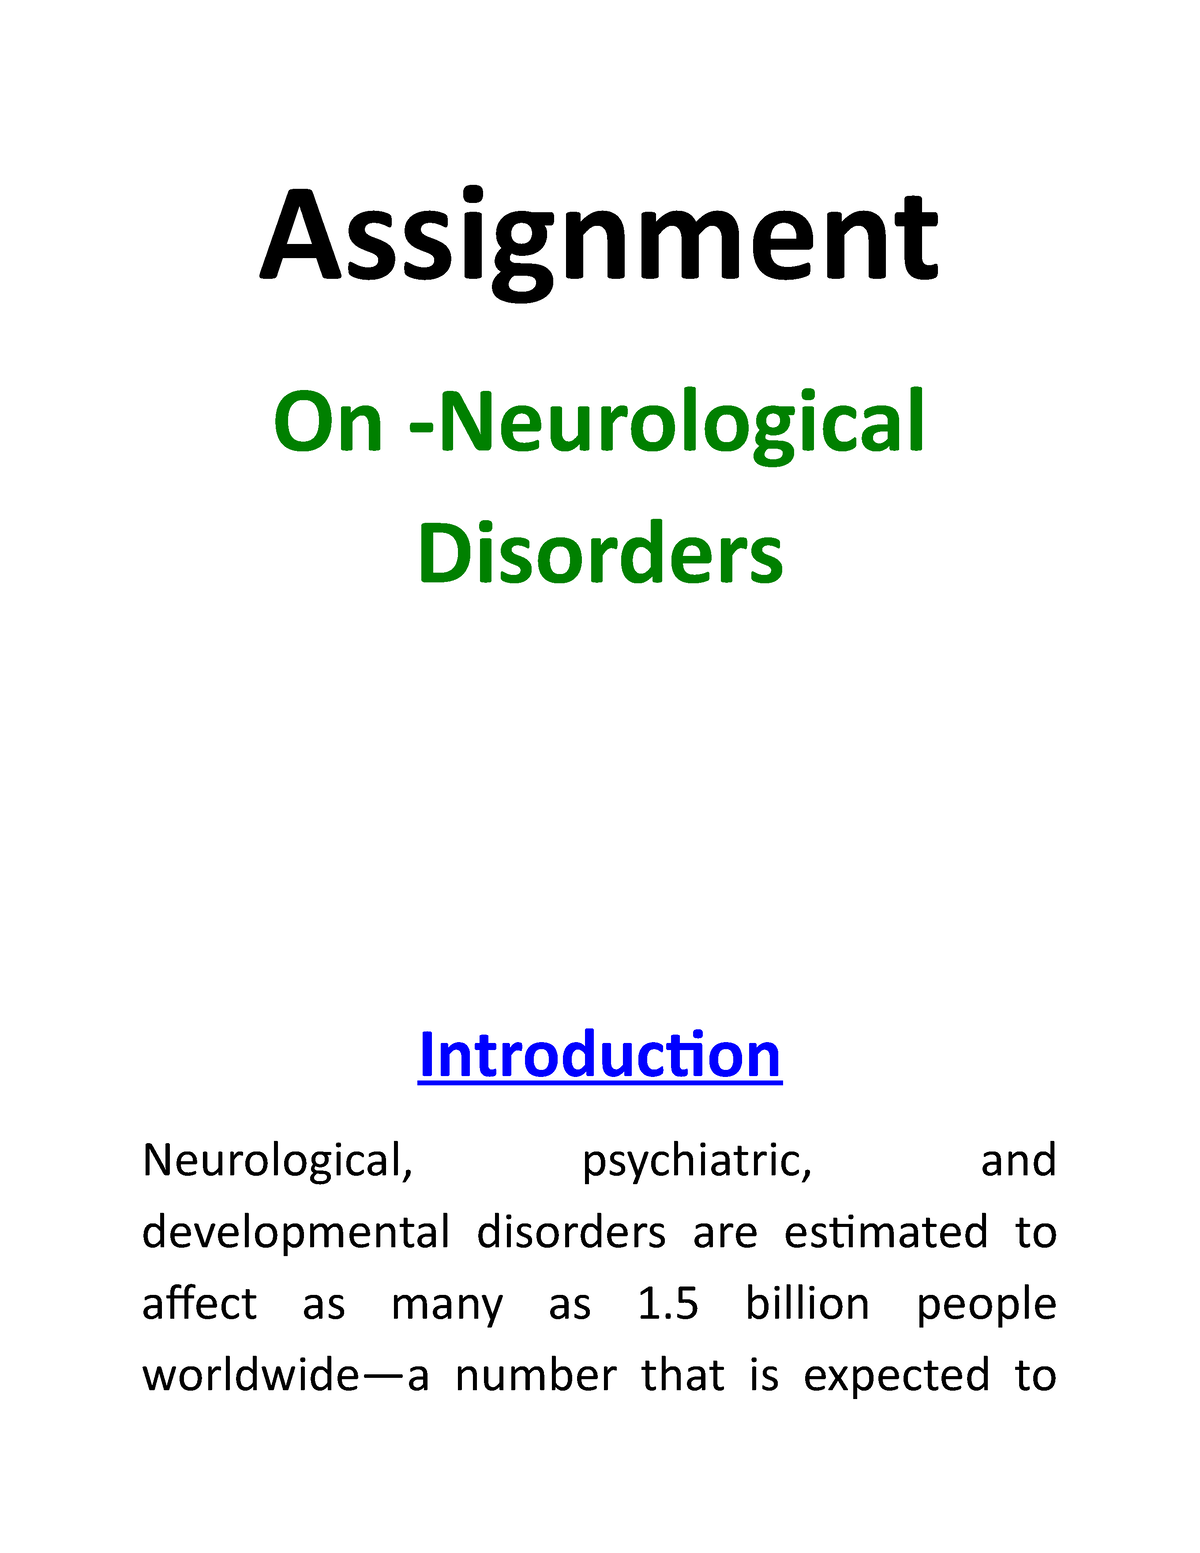 case study 64 neurological disorders answers